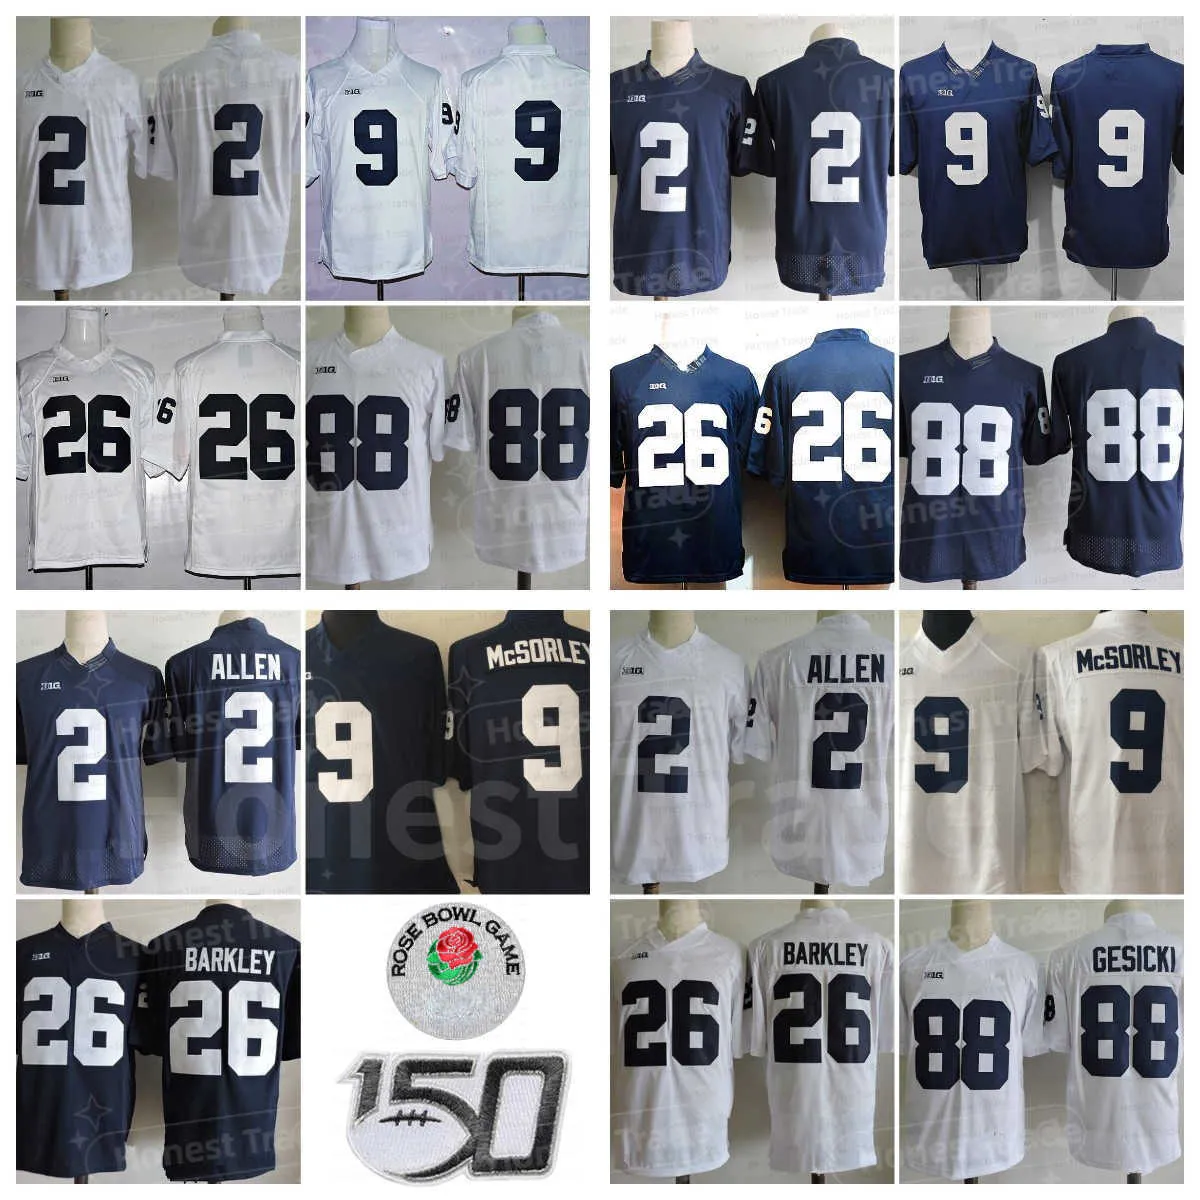 NCAA Penn State College #26 Saquon 9 Trace McSorley 88 Mike Gesicki 2 Marcus Allen Paterno Stitched Jerseys White Navy 150th Men ashorms